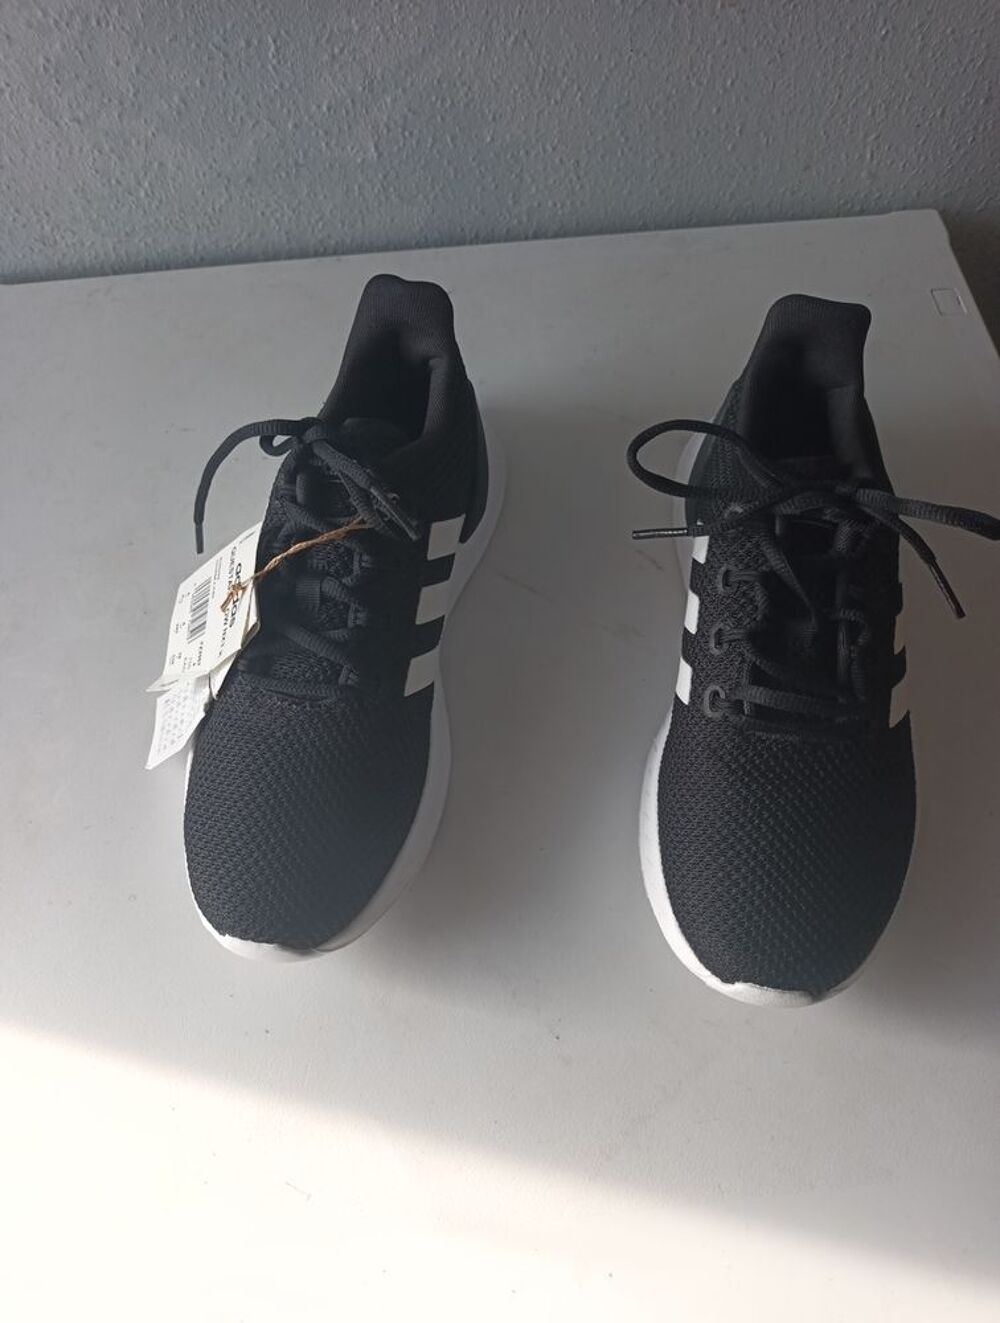 Chaussure Adidas noir Taille 38 Chaussures